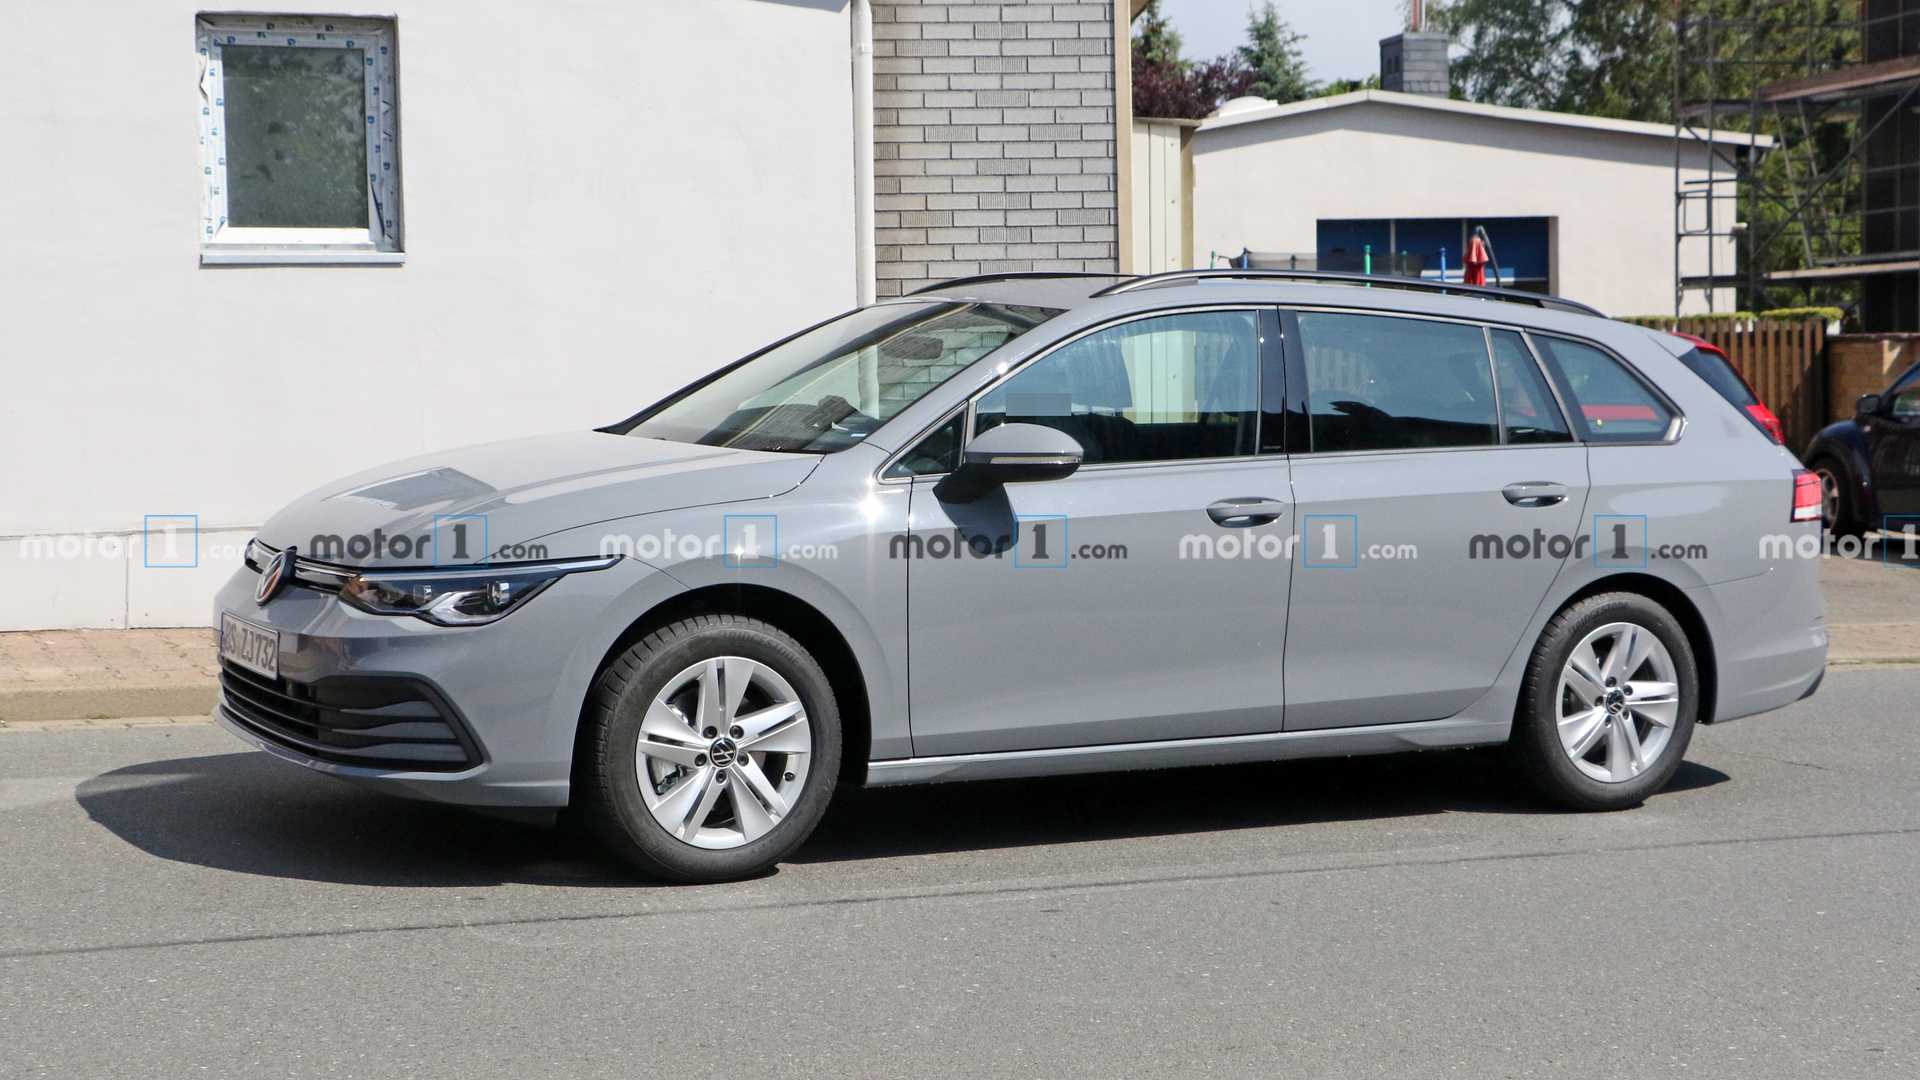 VW Golf 8 Variant is spied again, it may debut towards the end of